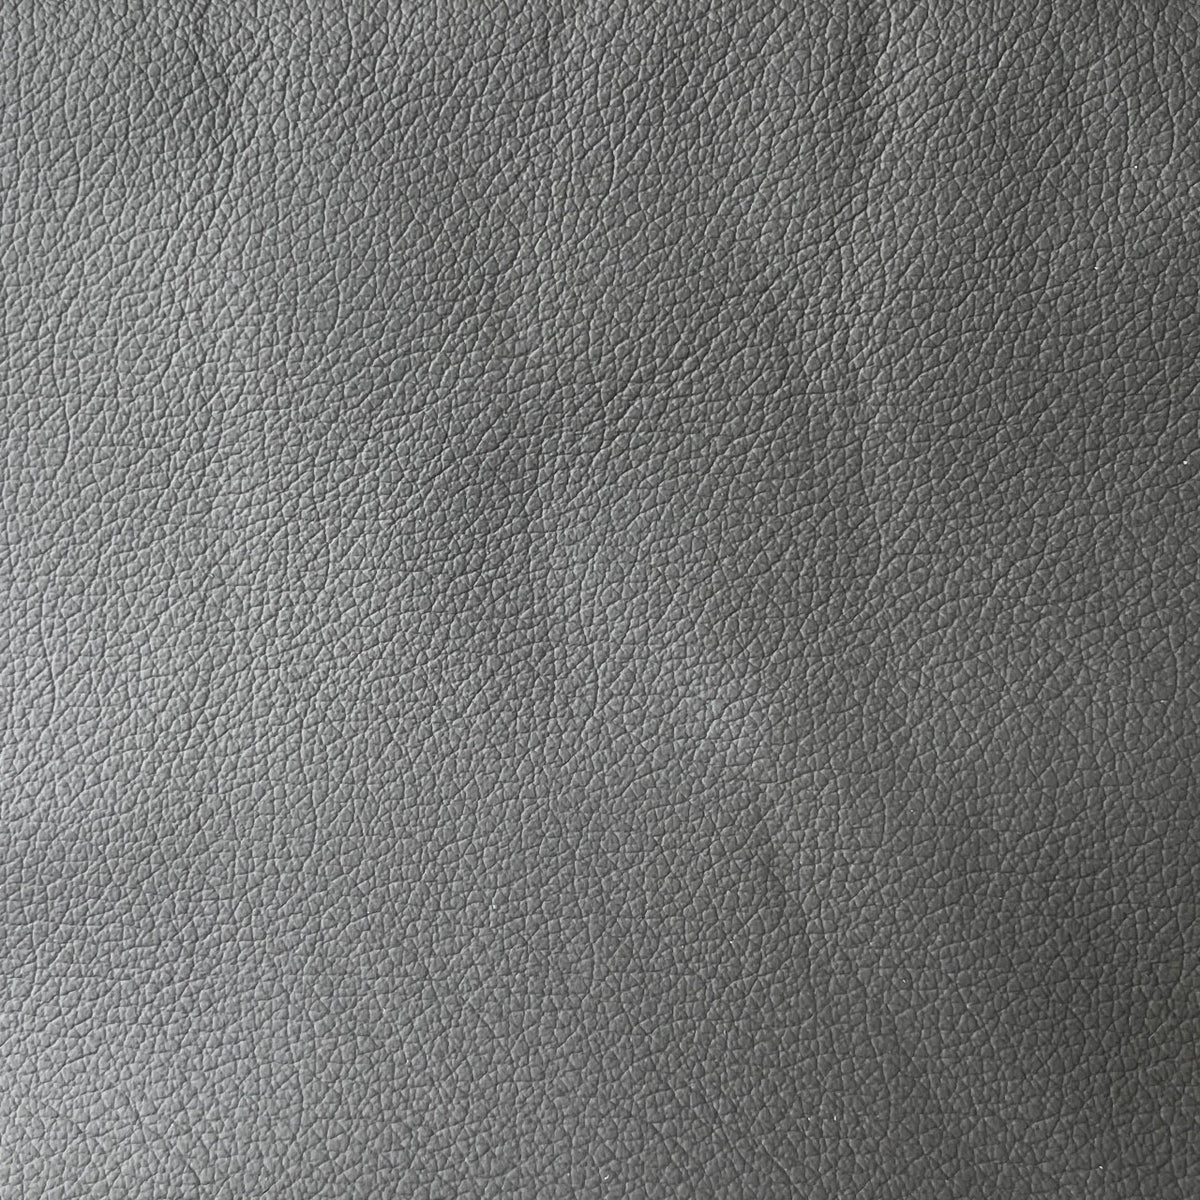 Upholstery Cow Hide #04a | Grey | 1.0/1.2mm | 65 sq.ft | $450 ea.